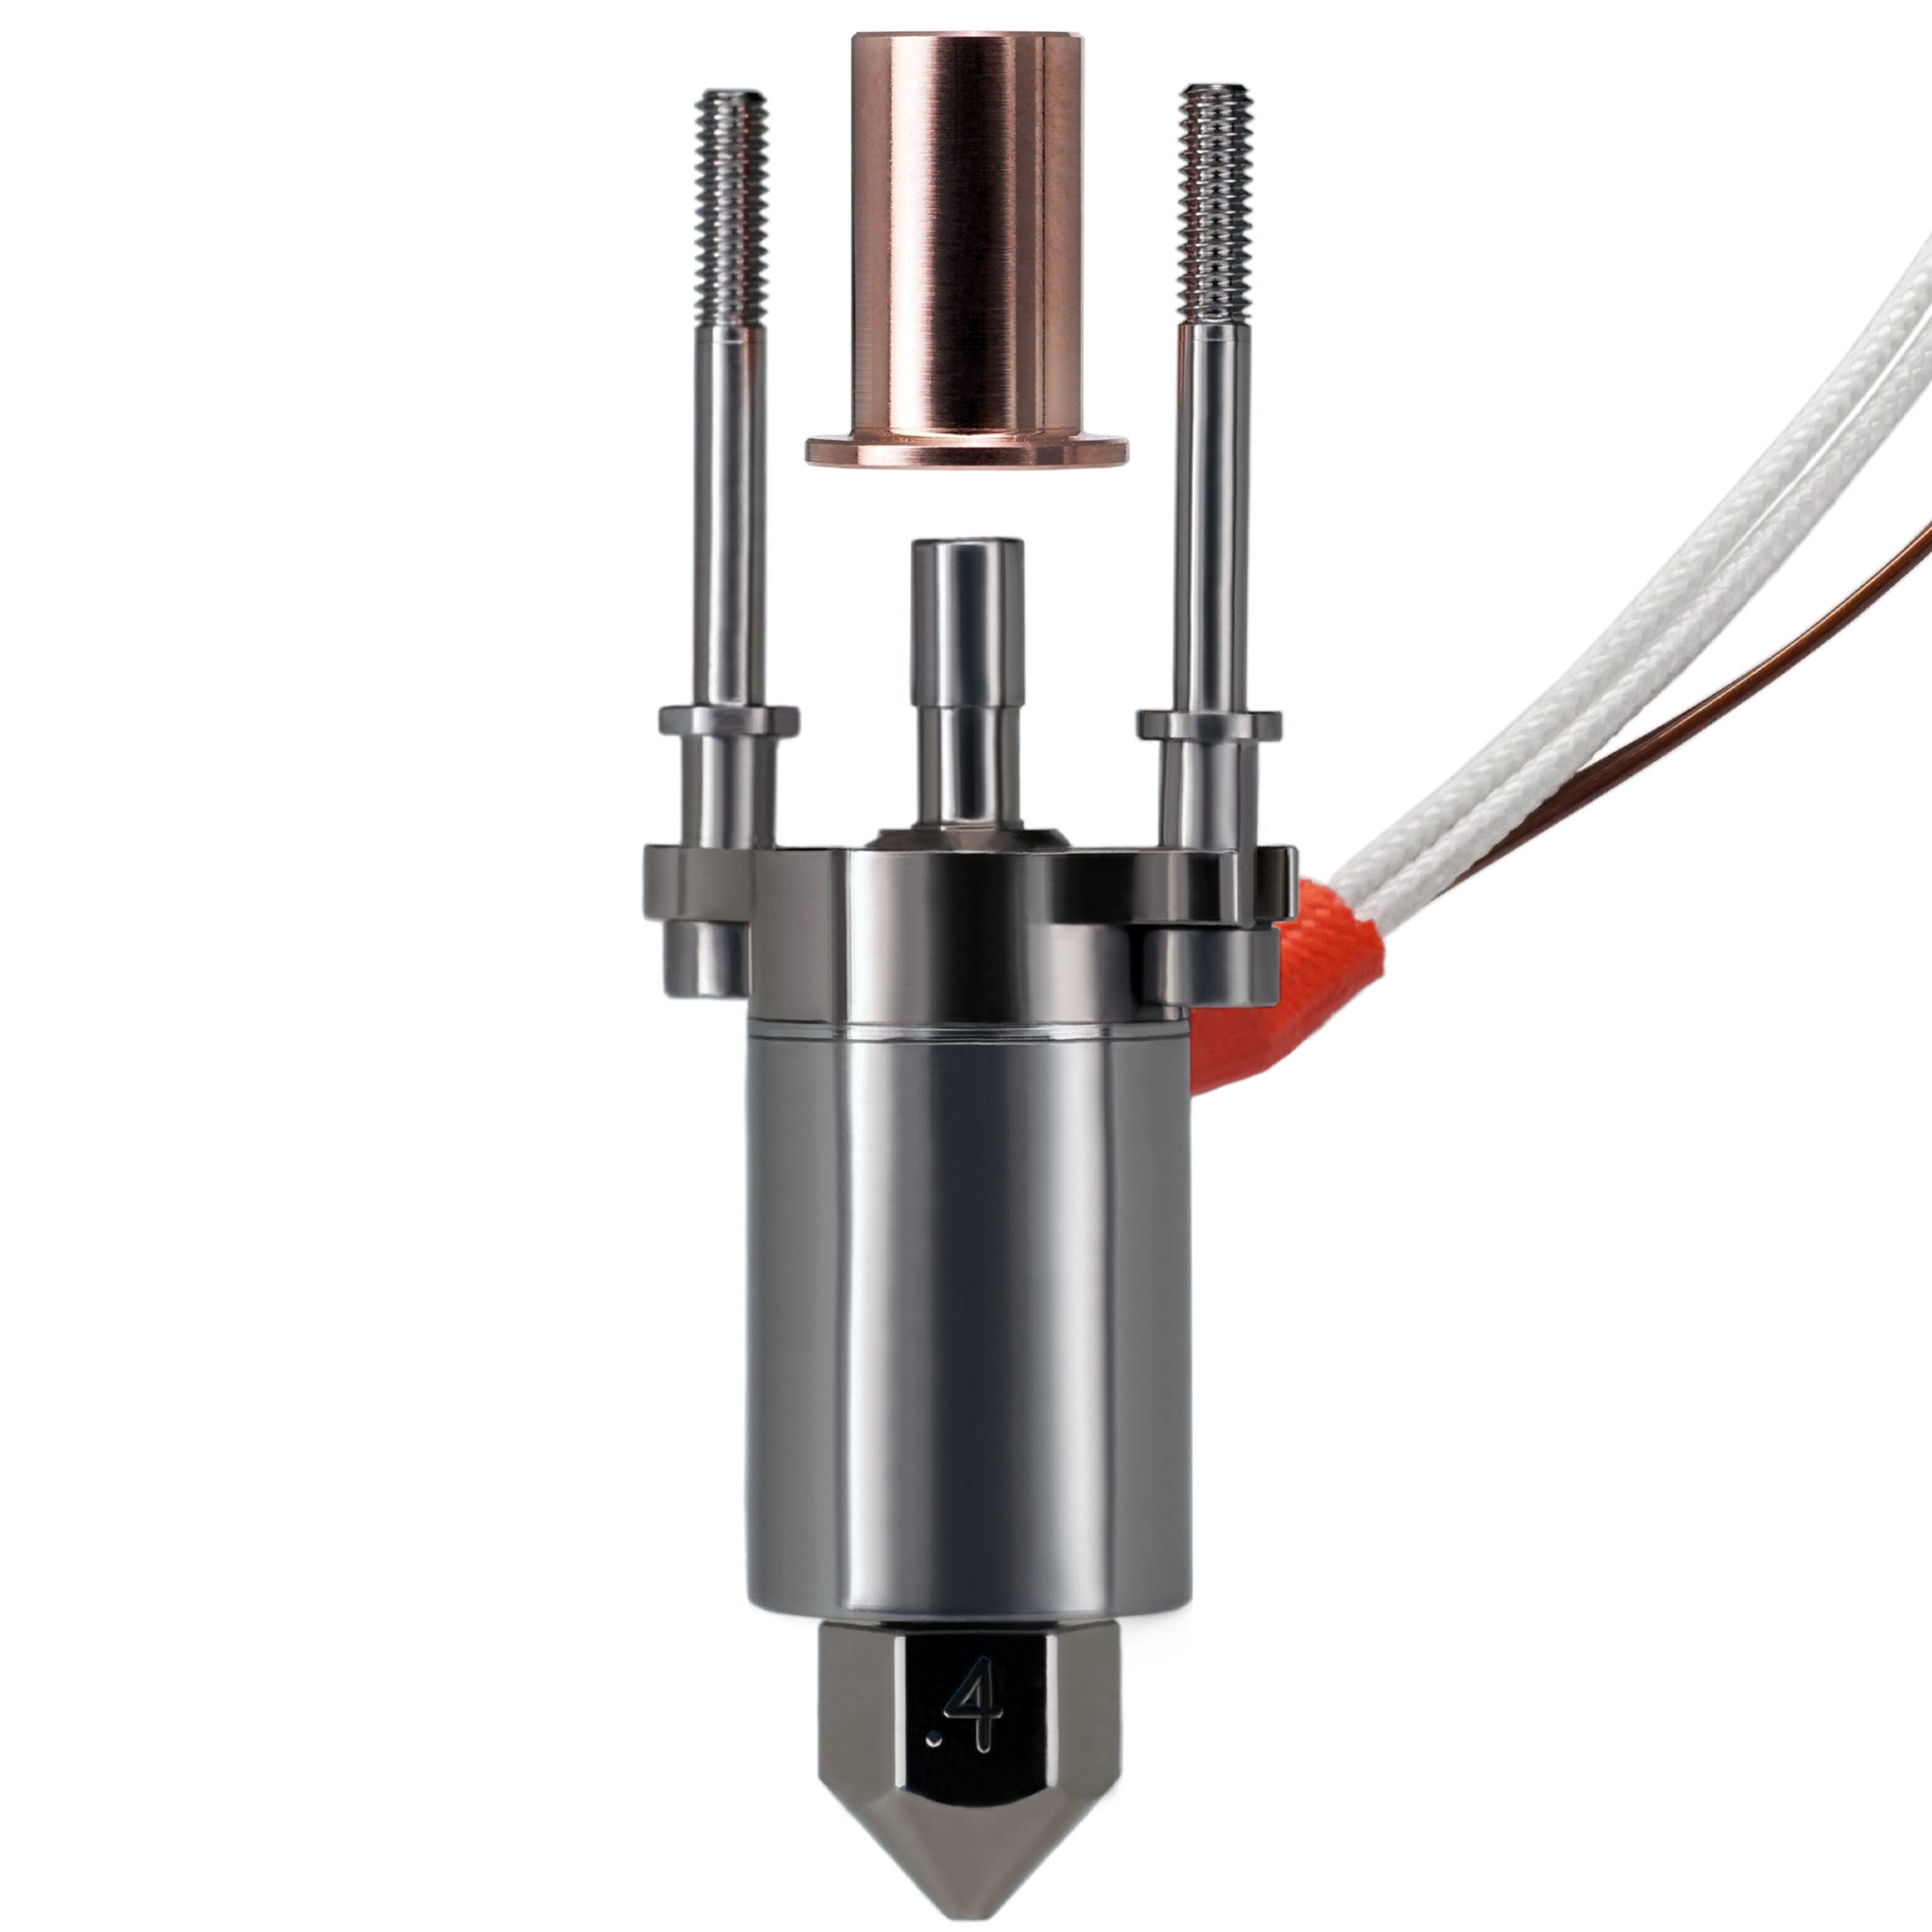 A metallic cylindrical device with two vertical screws and a copper component above it, featuring a leak-proof nozzle. The device has electrical wires extending from the right side, and it ends with a tapered, pointed tip at the bottom. This is the Micro Swiss FlowTech Hotend for Creality K1 from Micro Swiss.